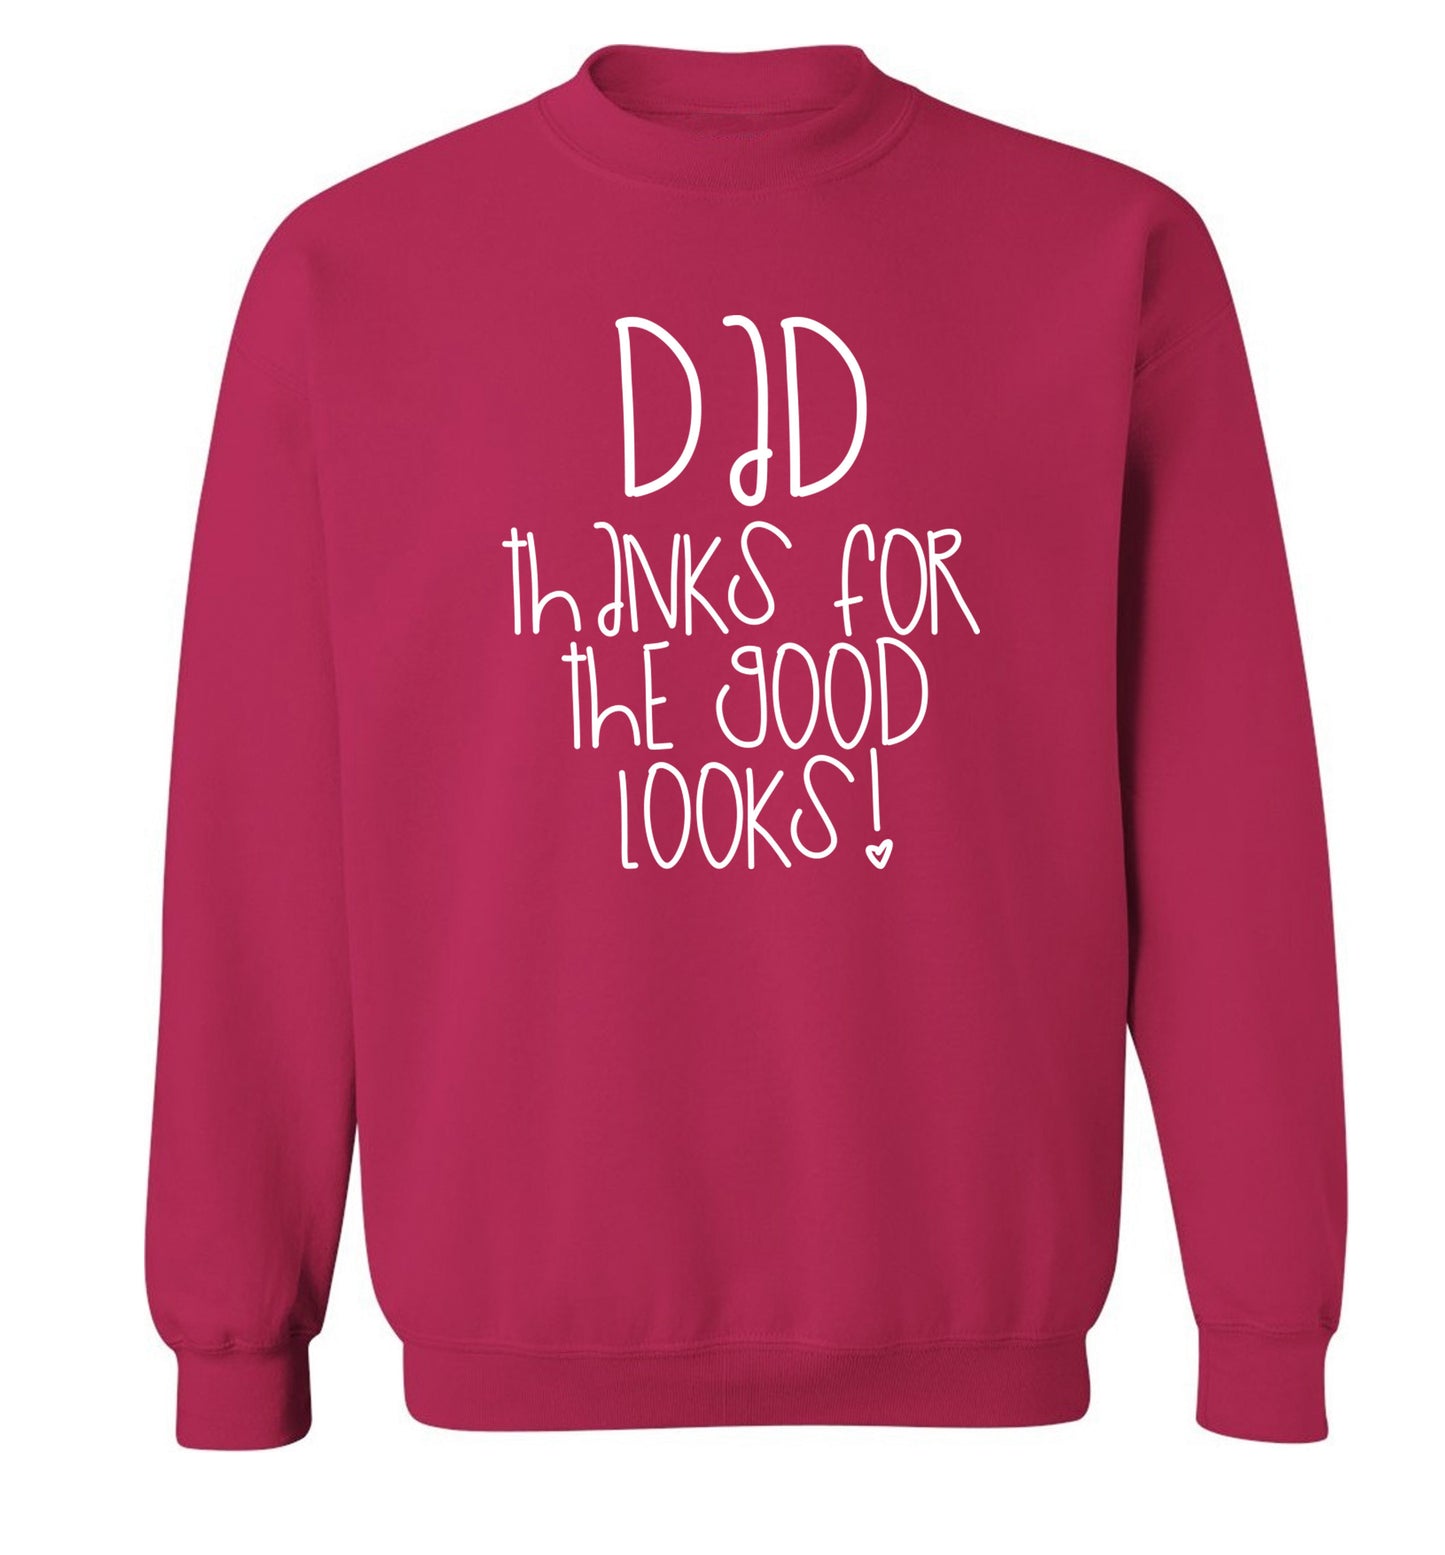 Dad thanks for the good looks Adult's unisex pink Sweater 2XL